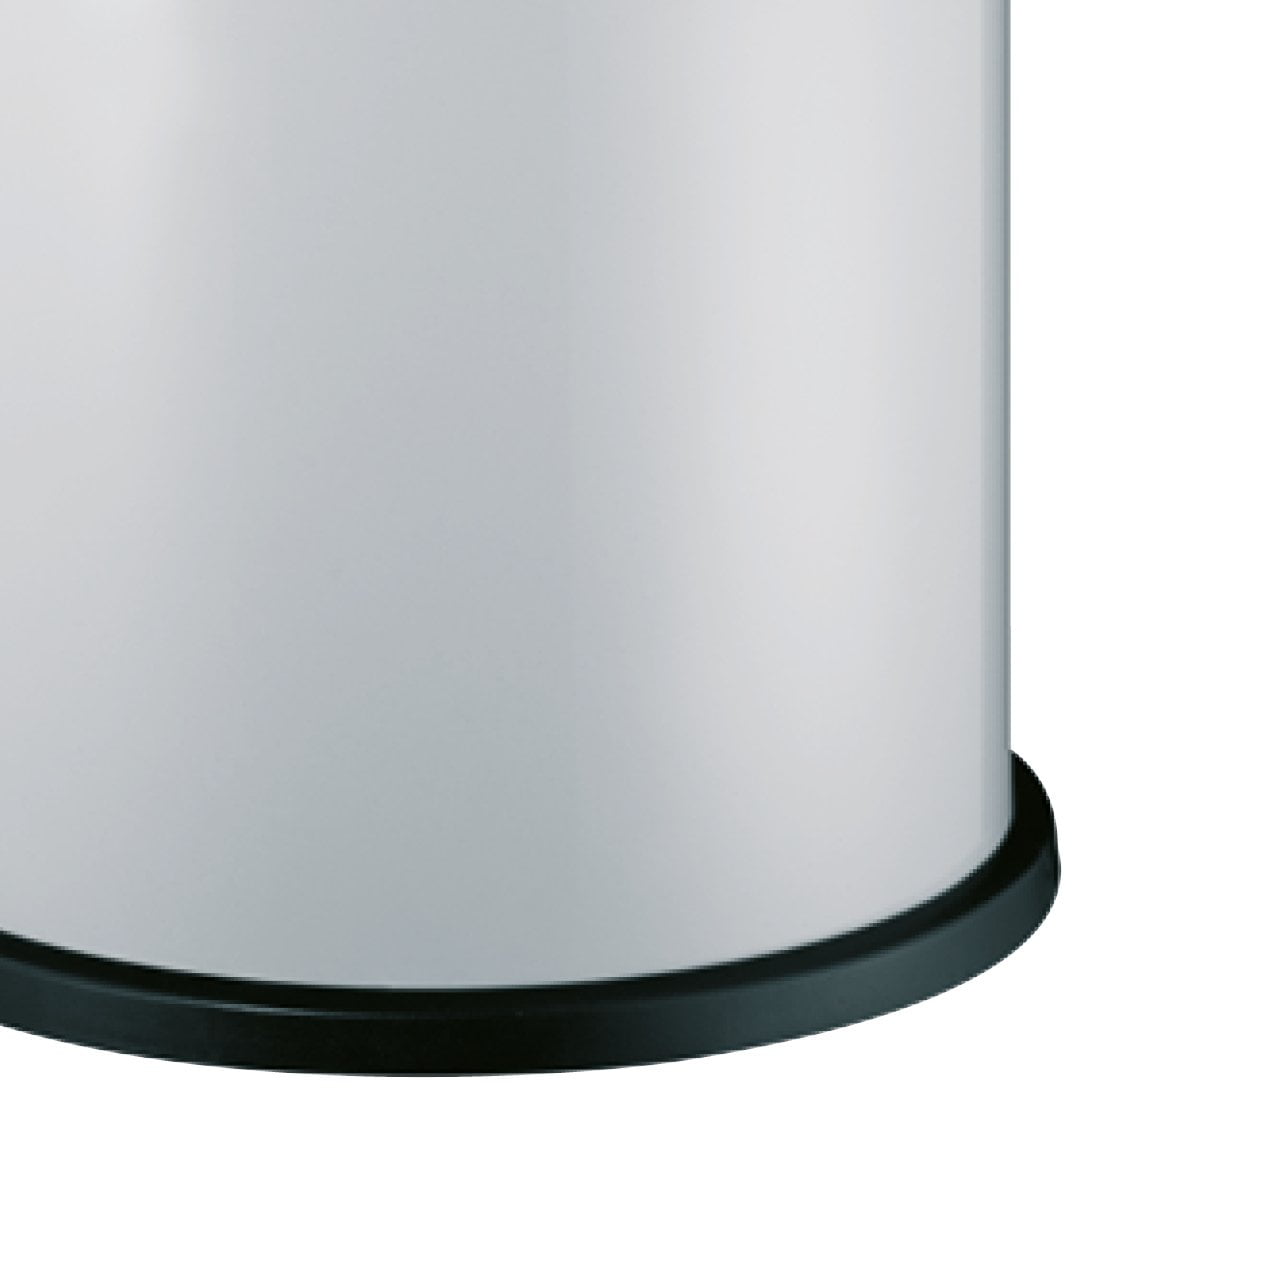 Wesco Pushboy Trash Can Stainless Steel, 50 liter